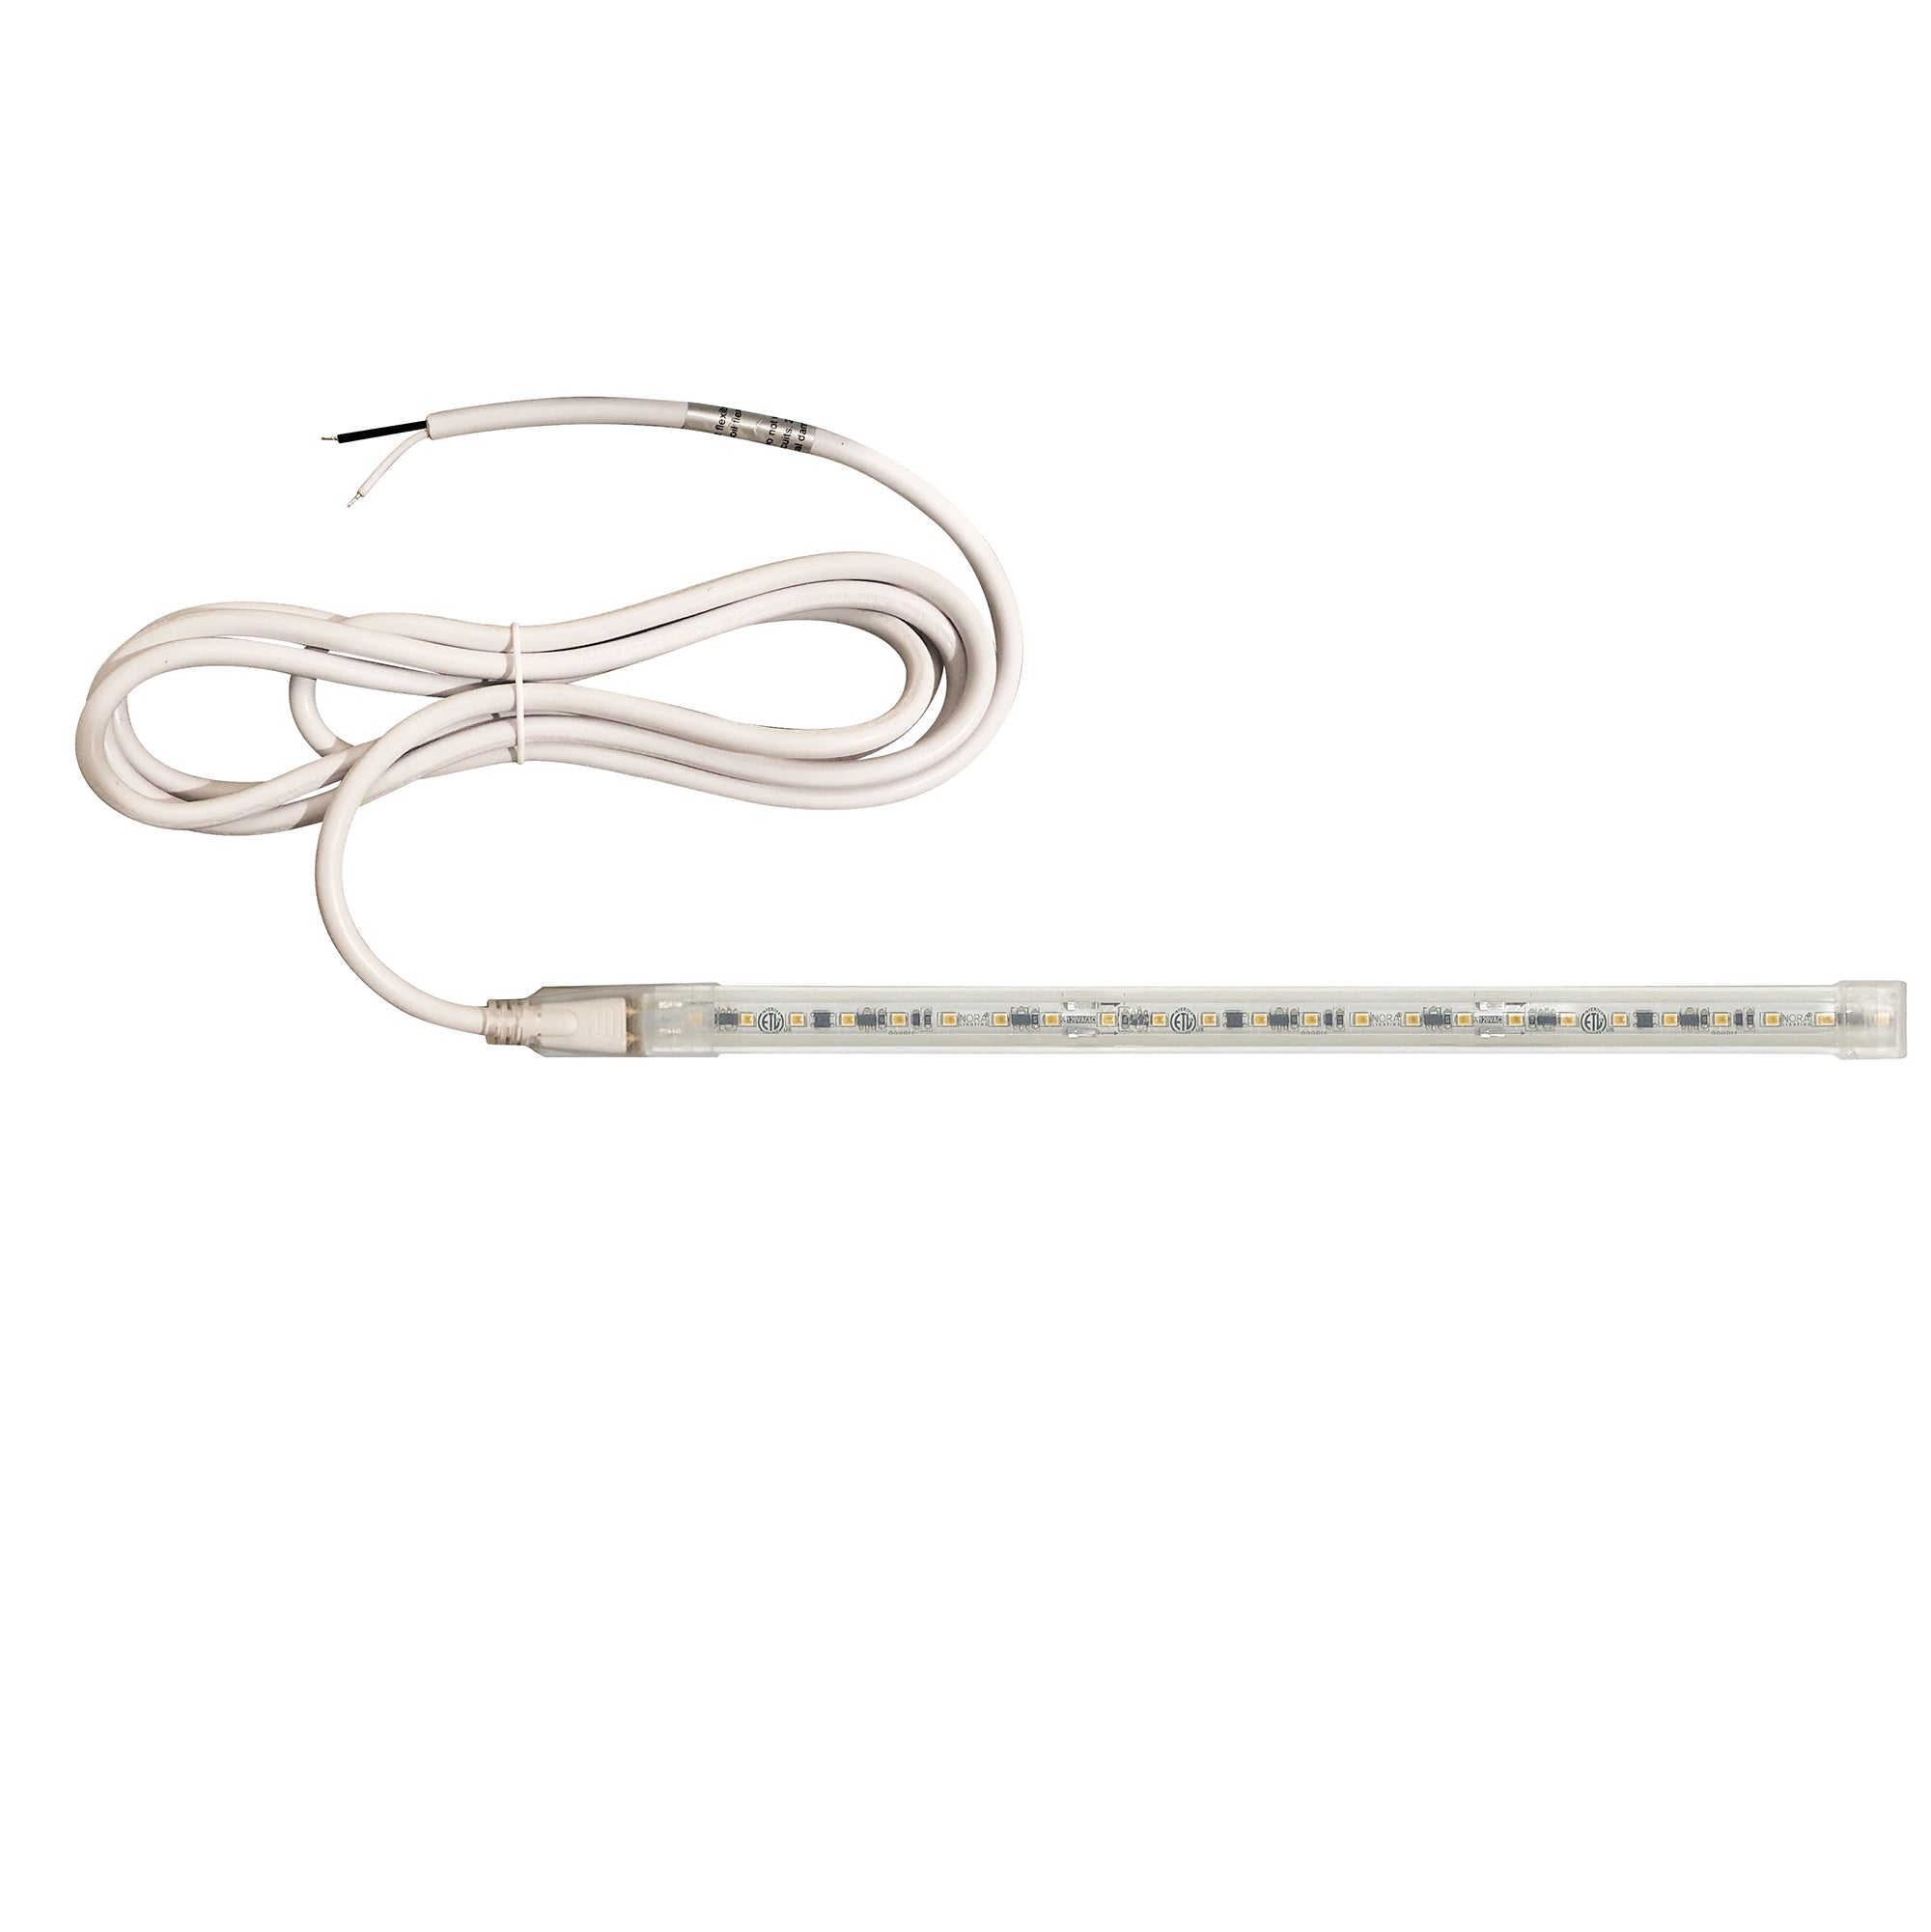 Nora Lighting NUTP13-W81-12-930/HW - Accent / Undercabinet - Custom Cut 81-ft 120V Continuous LED Tape Light, 330lm / 3.6W per foot, 3000K, w/ Mounting Clips and 8' Hardwired Power Cord